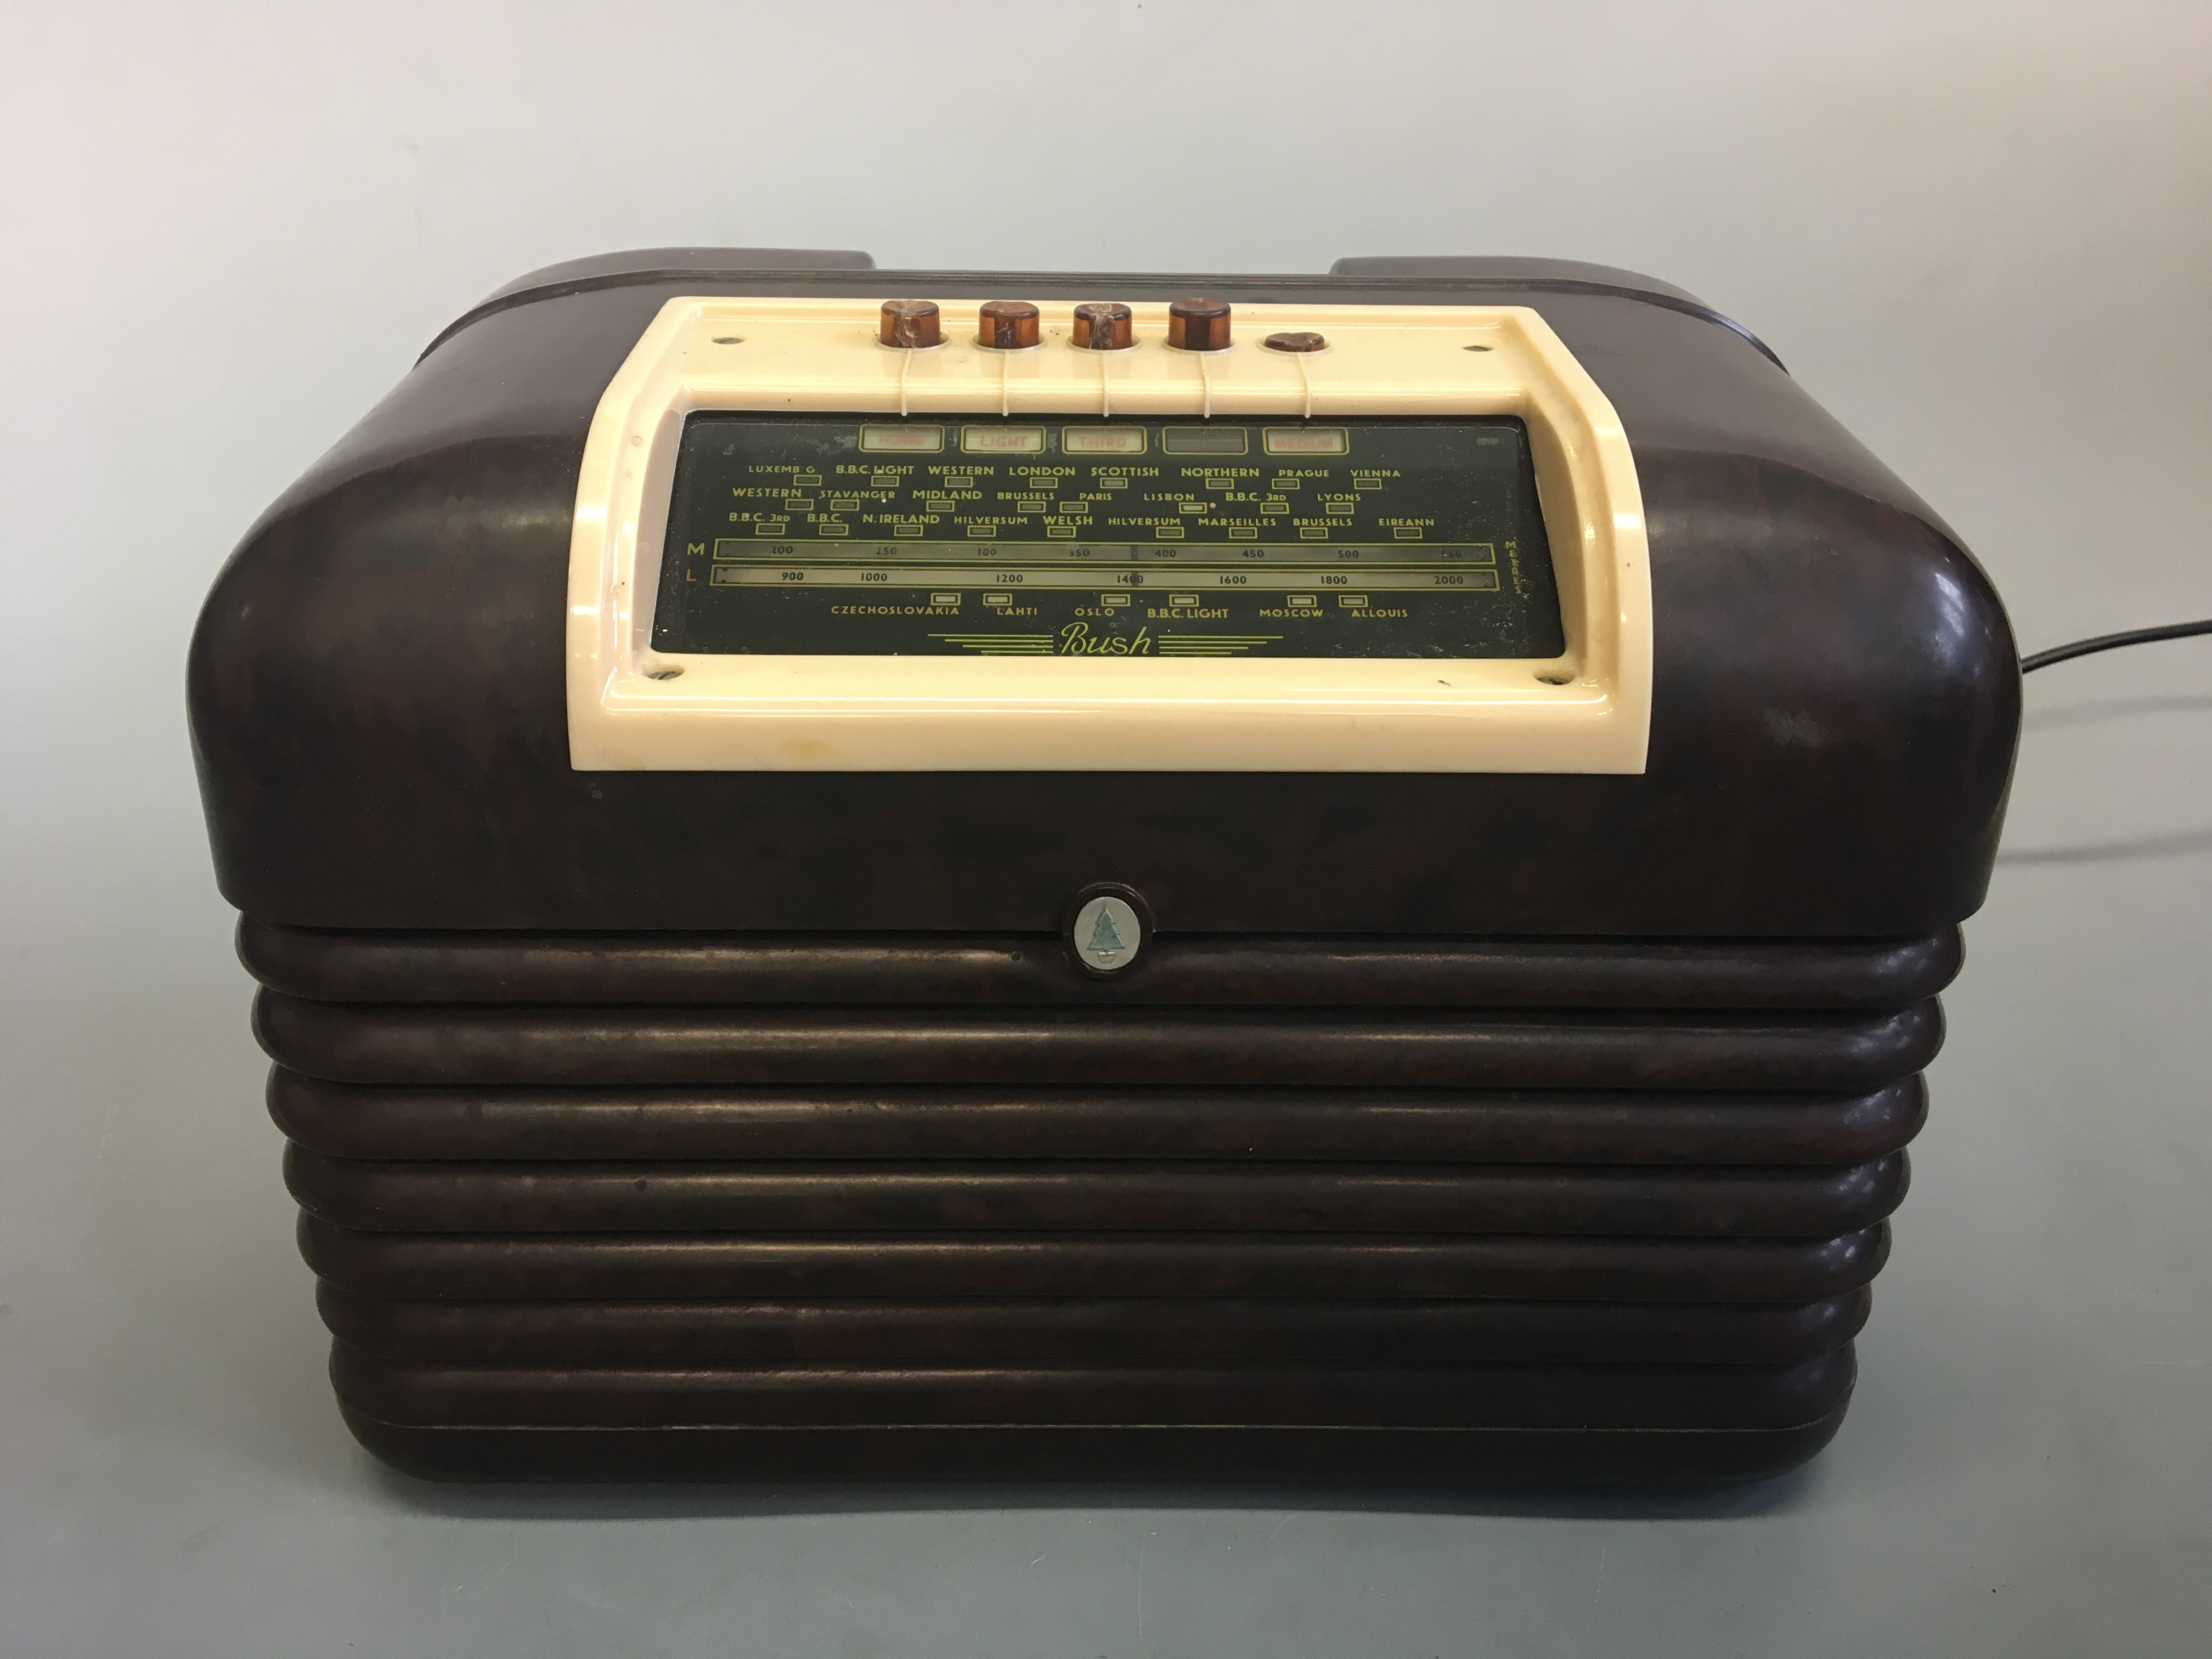 A Bush type DAC 10 brown Bakelite radio. IMPORTANT: Online viewing and bidding only. No in person